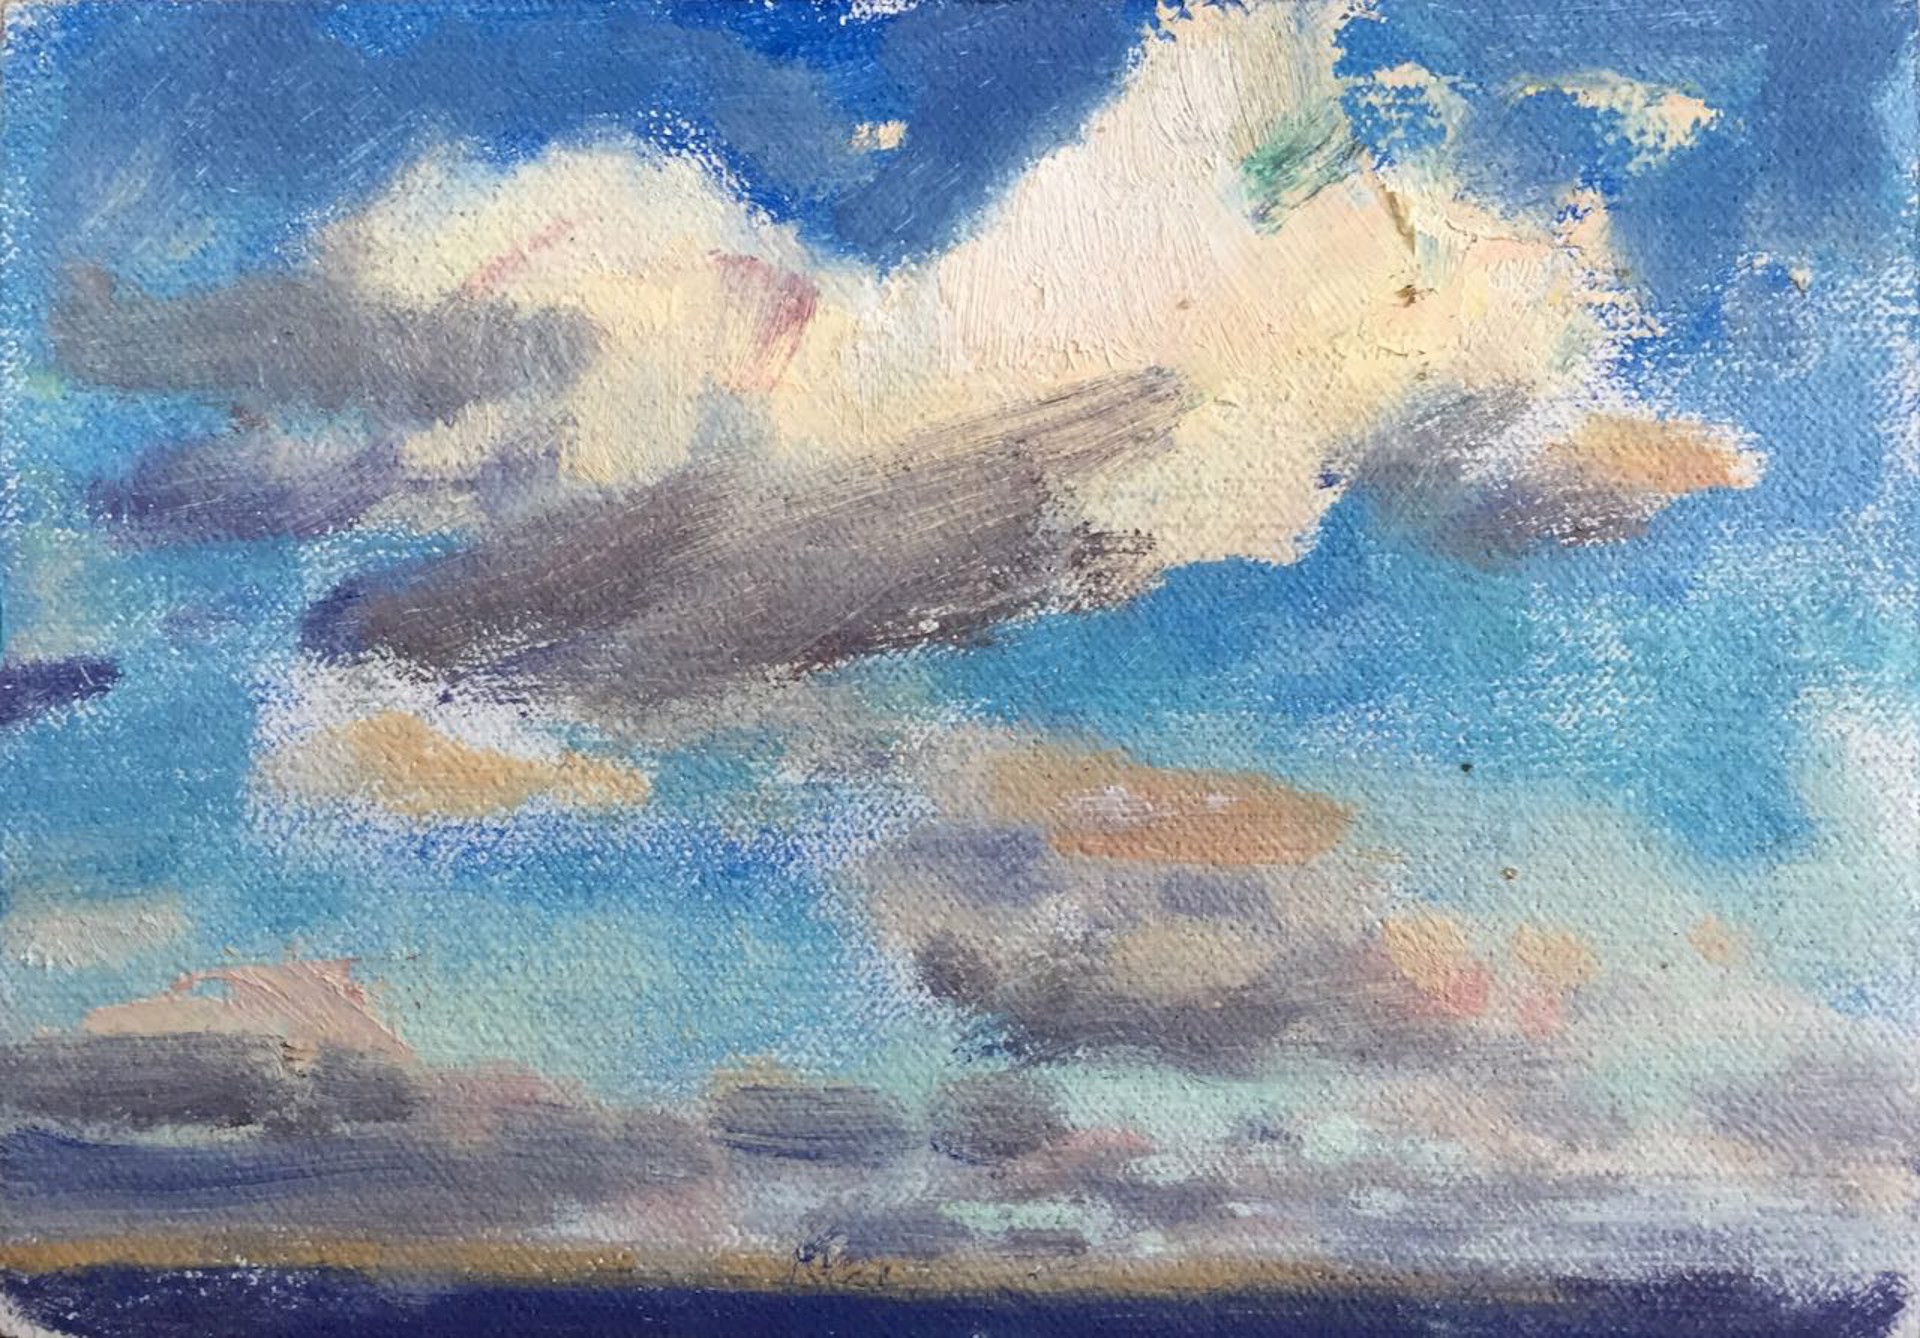 Clouds Over Provincetown #1 by Donald Beal